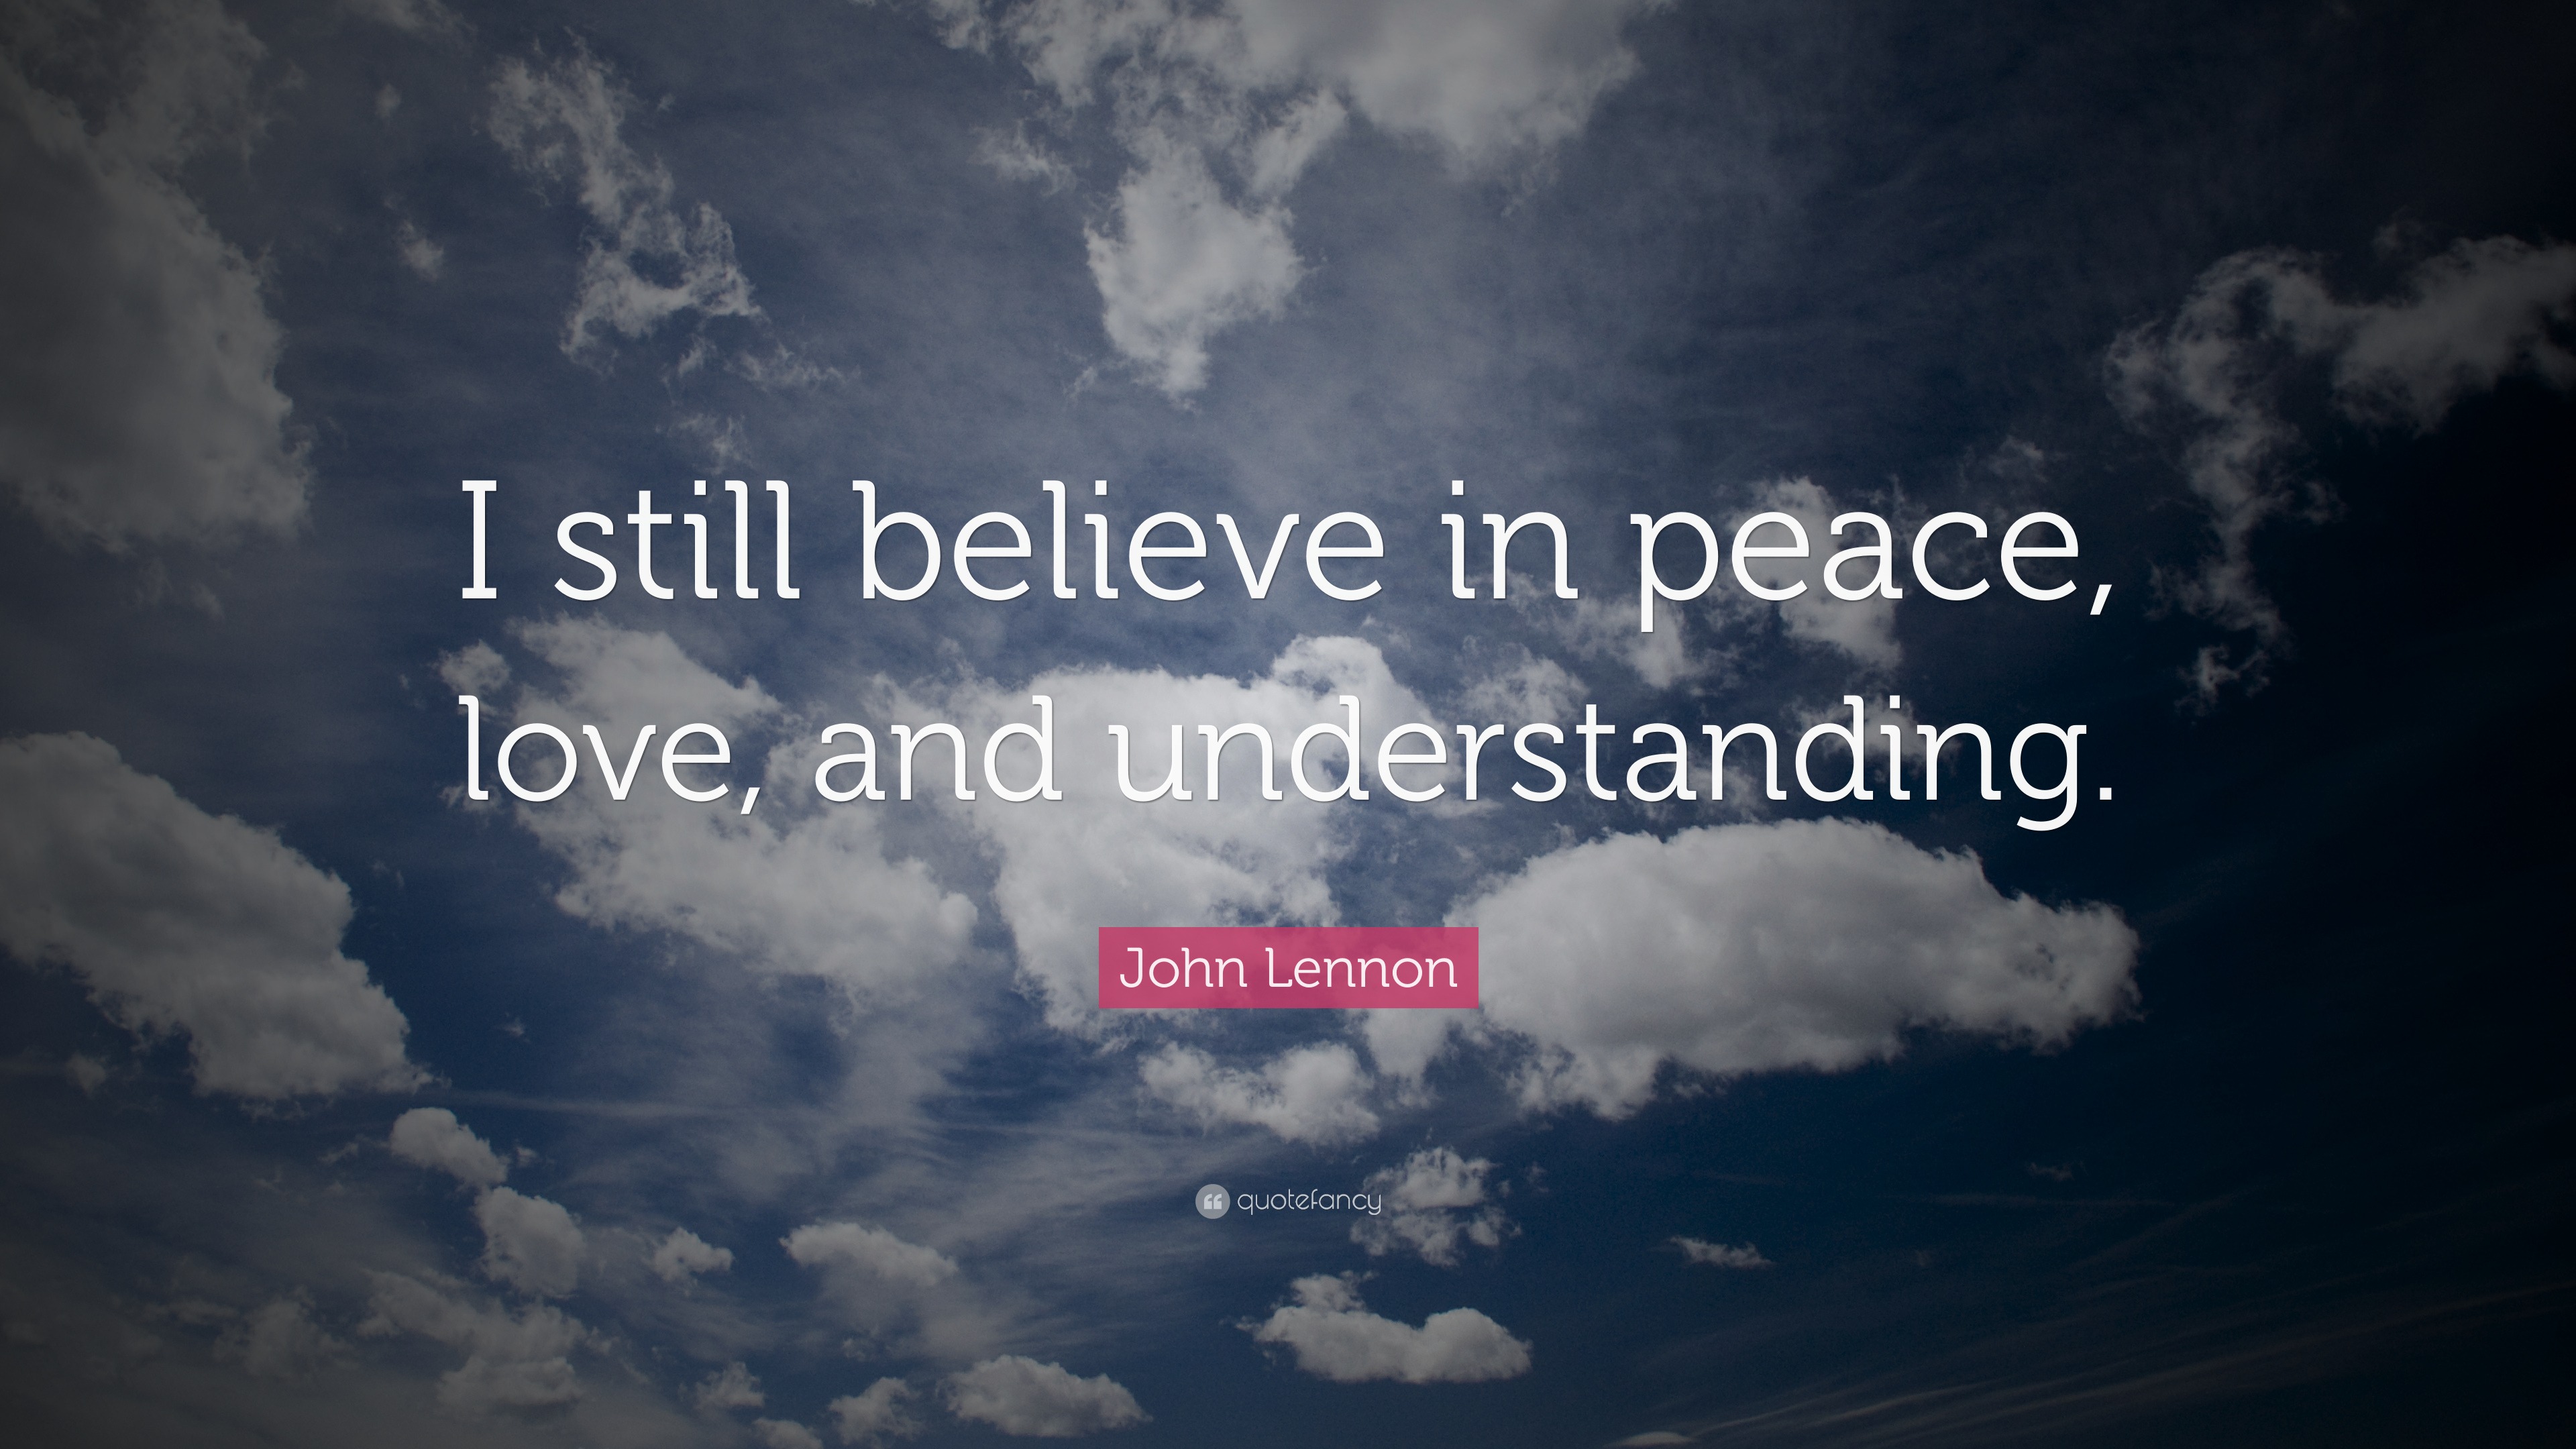 John Lennon Quote: "I still believe in peace, love, and ...